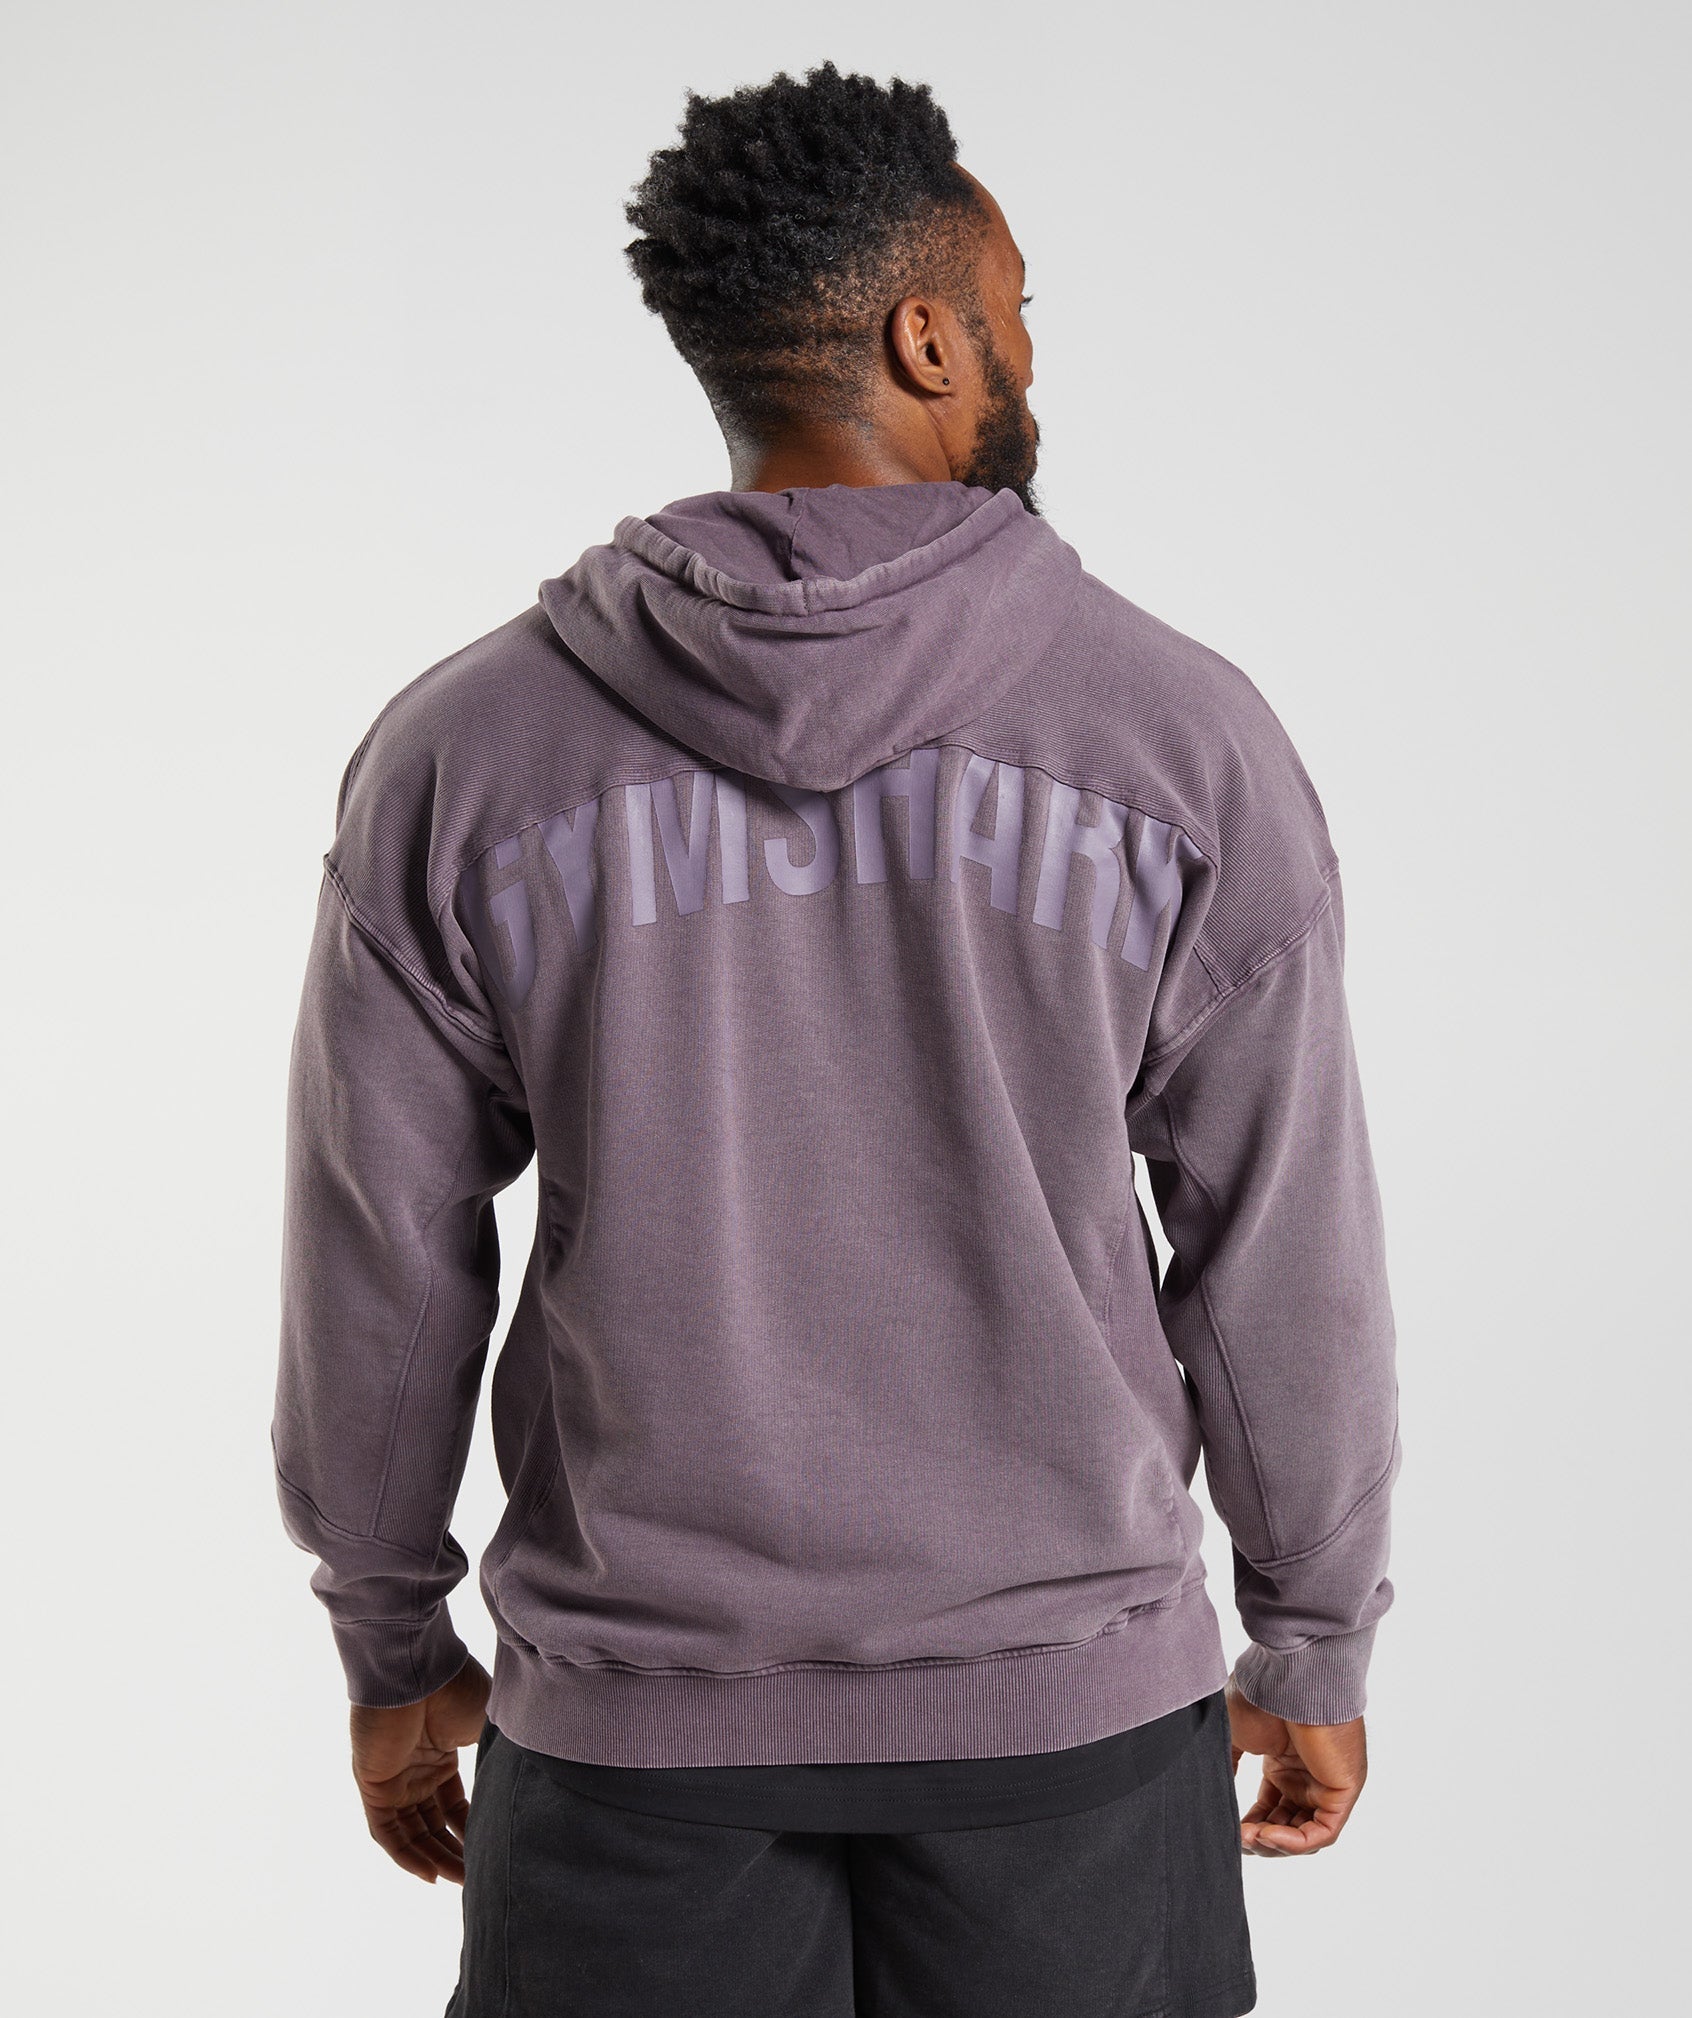 outlet websites (IN SEARCH OF) Gymshark Onyx hoodie quarter zip (XL)